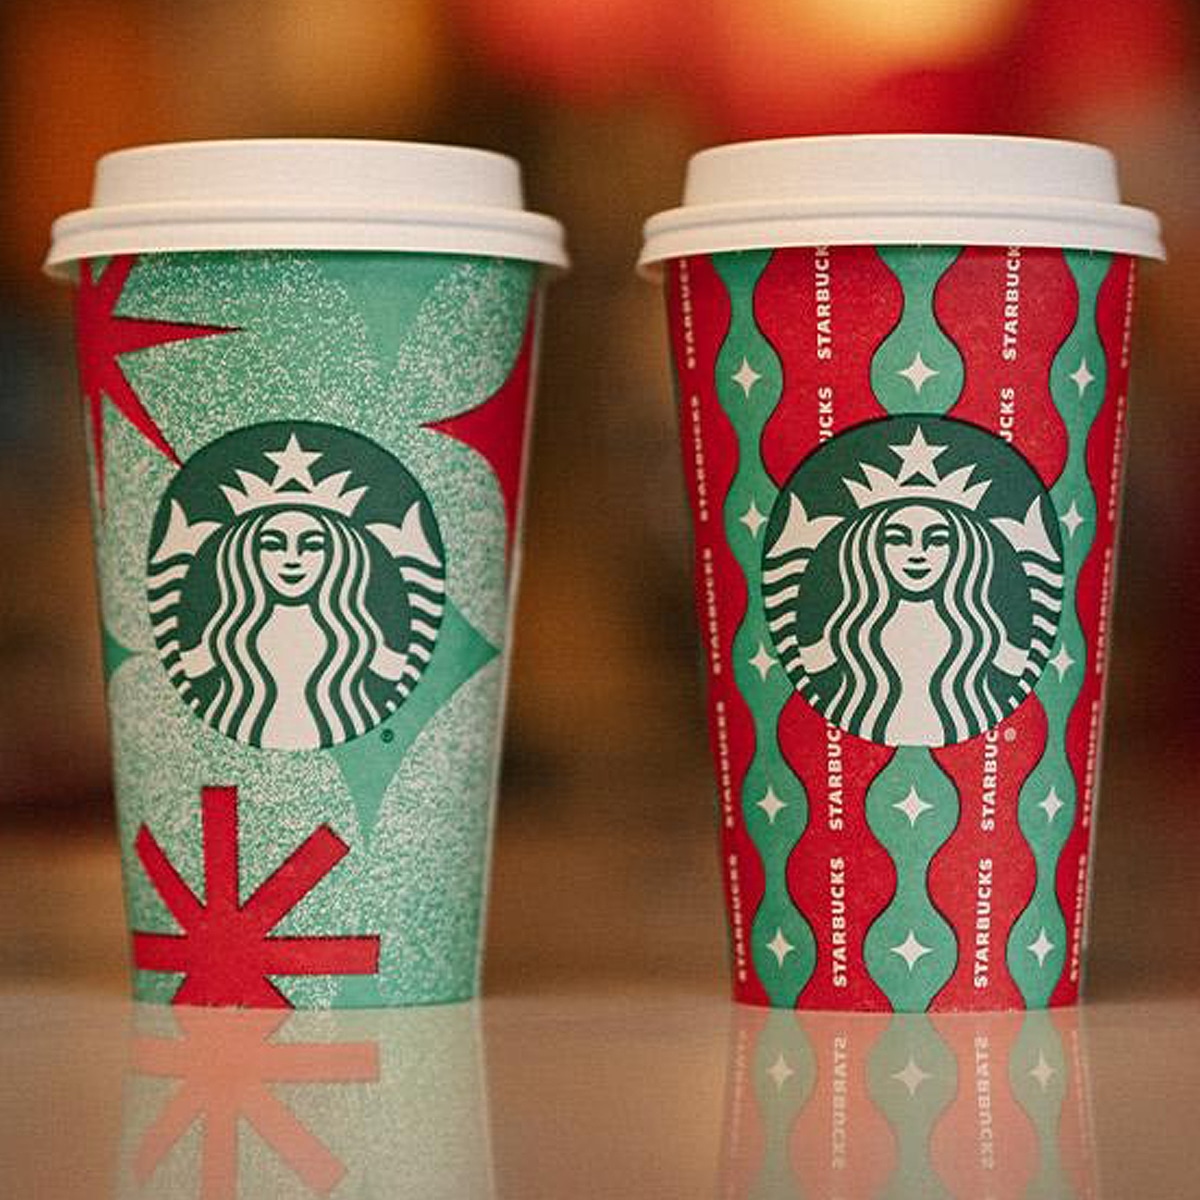 https://akns-images.eonline.com/eol_images/Entire_Site/2022103/rs_1200x1200-221103070113-1200-Starbucks-Holiday-Cups-2022-LT-11322-Courtesy-Starbucks.jpg?fit=around%7C1200:1200&output-quality=90&crop=1200:1200;center,top